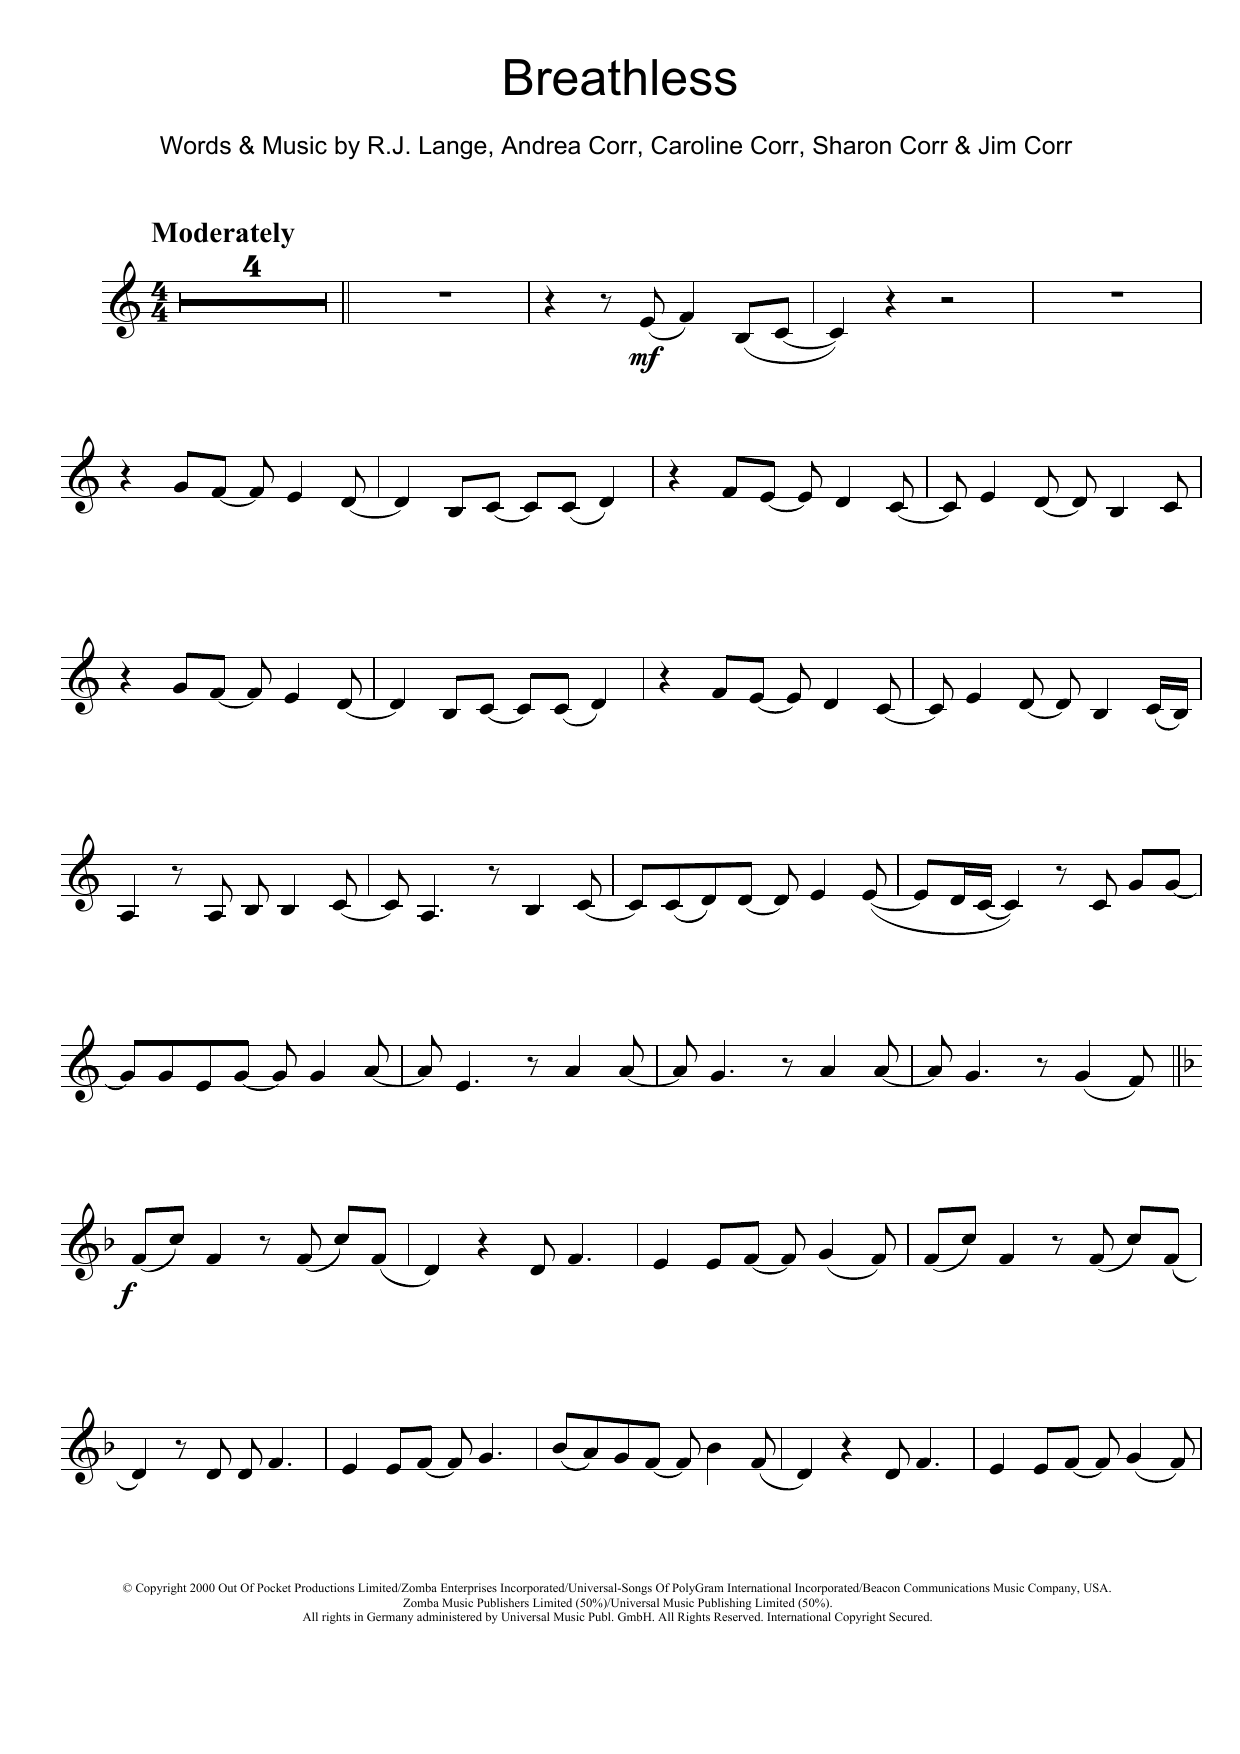 Download The Corrs Breathless Sheet Music